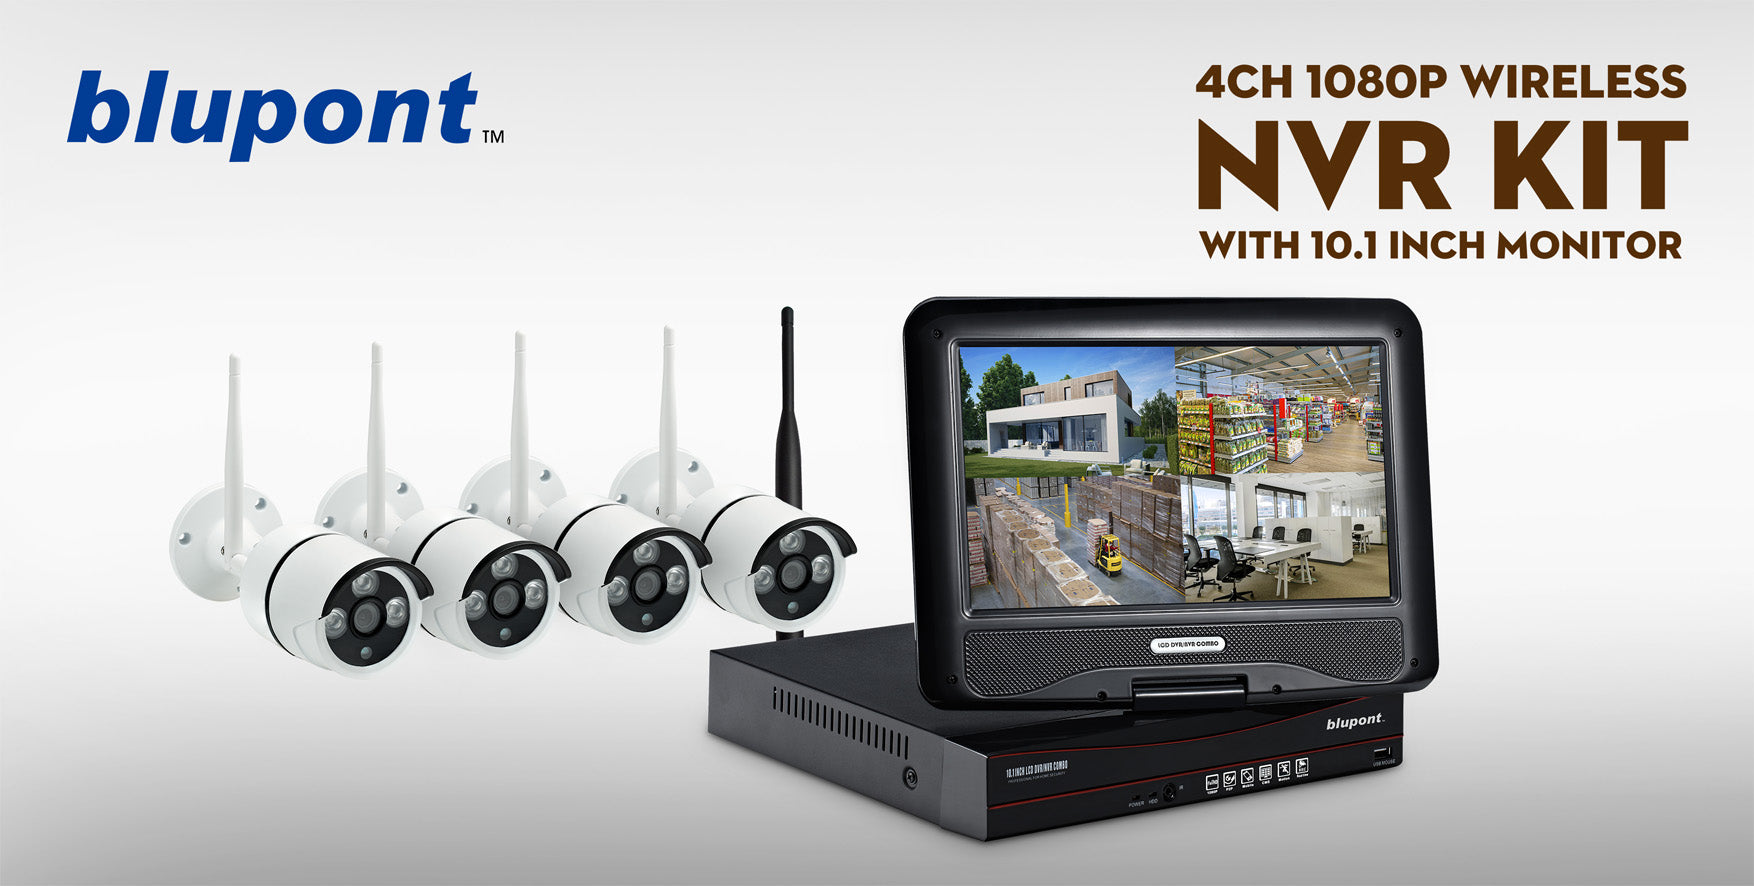 4-Channel NVR Kit with Colour LCD Display and 4 CCTV Cameras (KIT-MONIP4CAMIP)